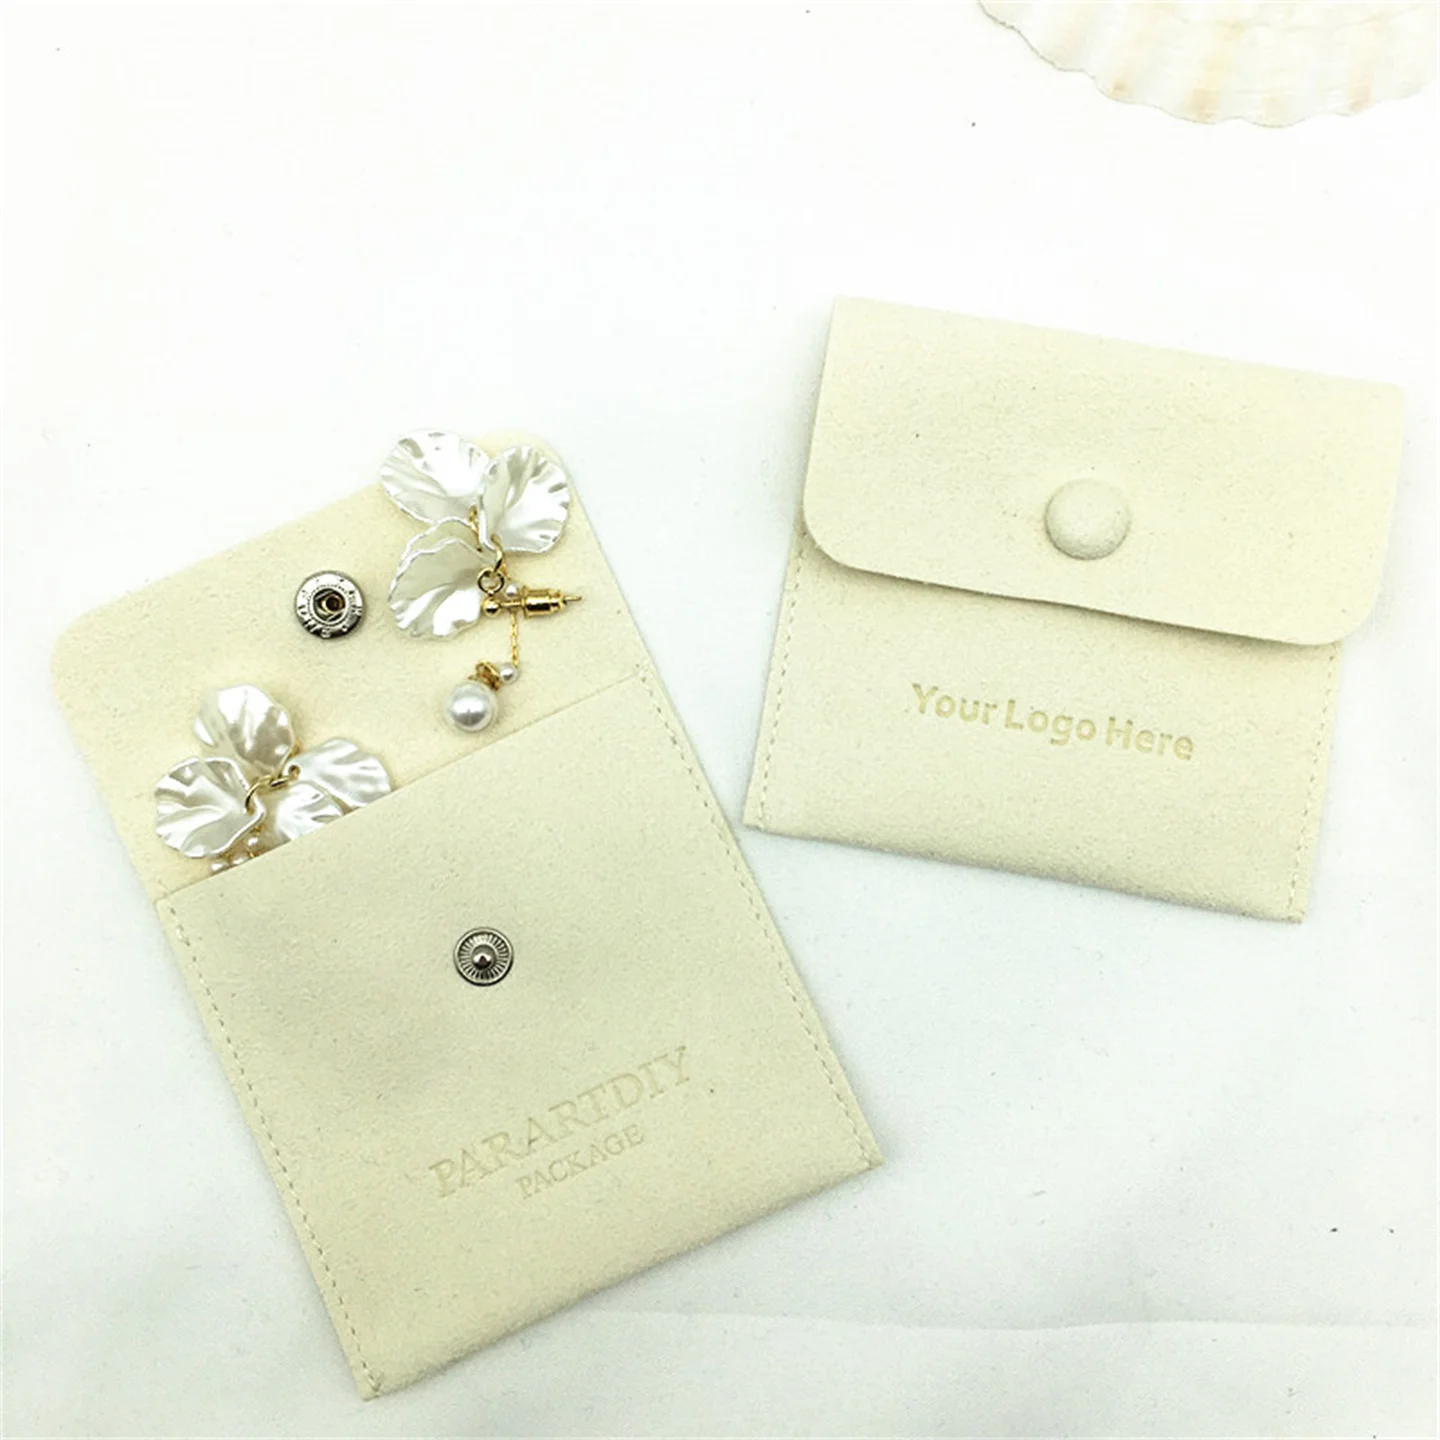 50 white beige snap bags can be personalized logo printing custom size earring packaging bag necklace ring gift bag 50pcs white beige personalized logo printing jewelry bags custom earrings packaging bags brooches ring gift bags wholesale